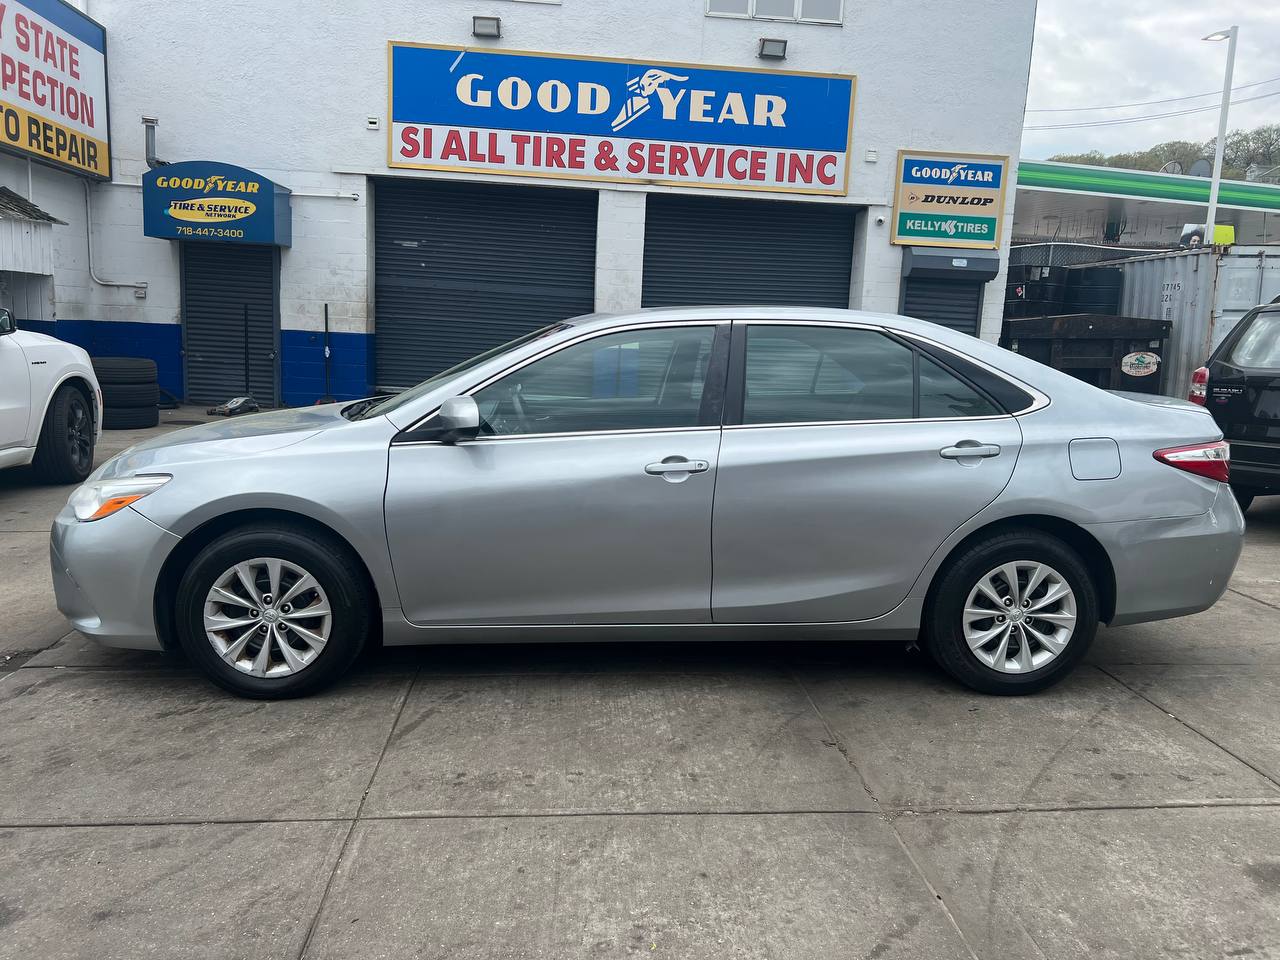 Used - Toyota Camry LE Sedan for sale in Staten Island NY